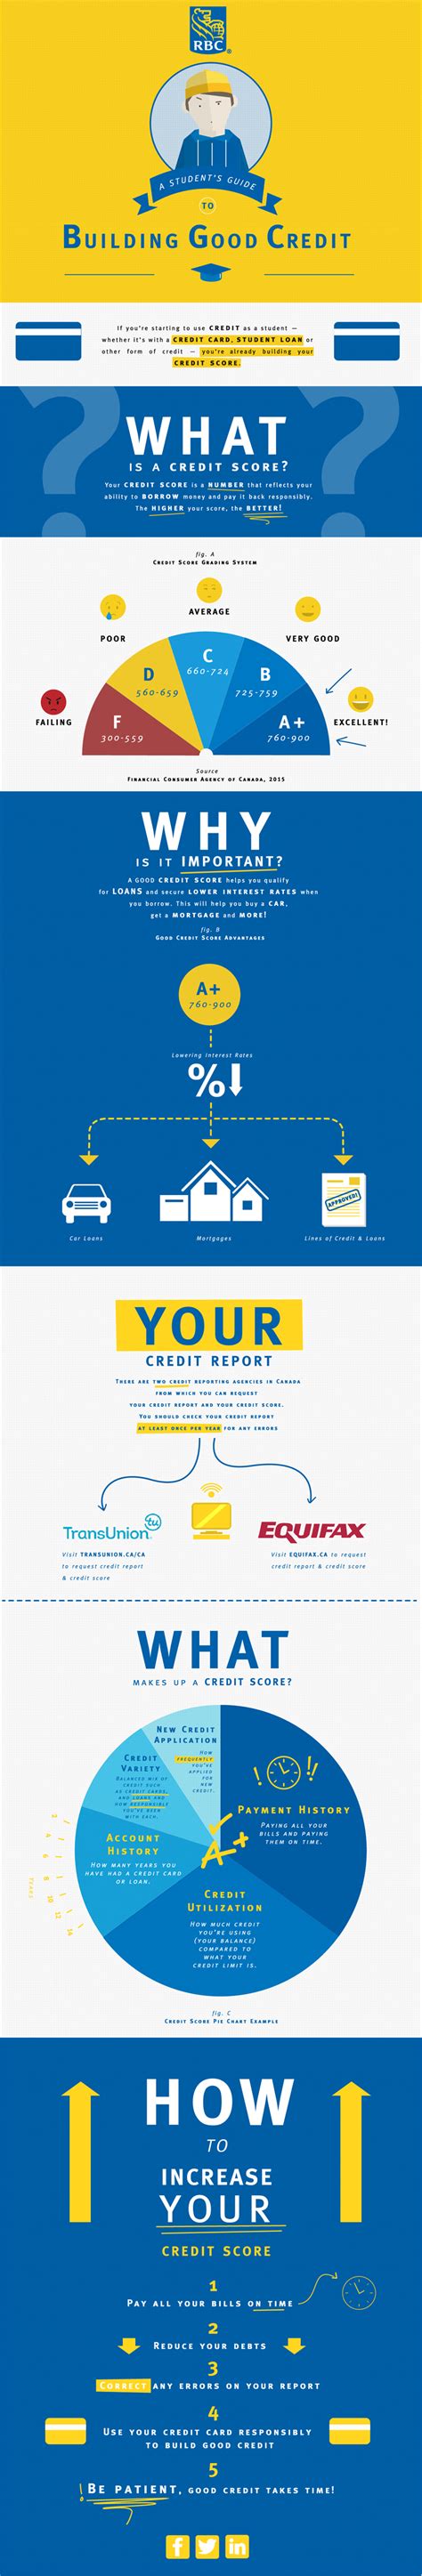 Building credit with a credit card requires time and a few good habits. Building Good Credit - Infographic - RBC Royal Bank